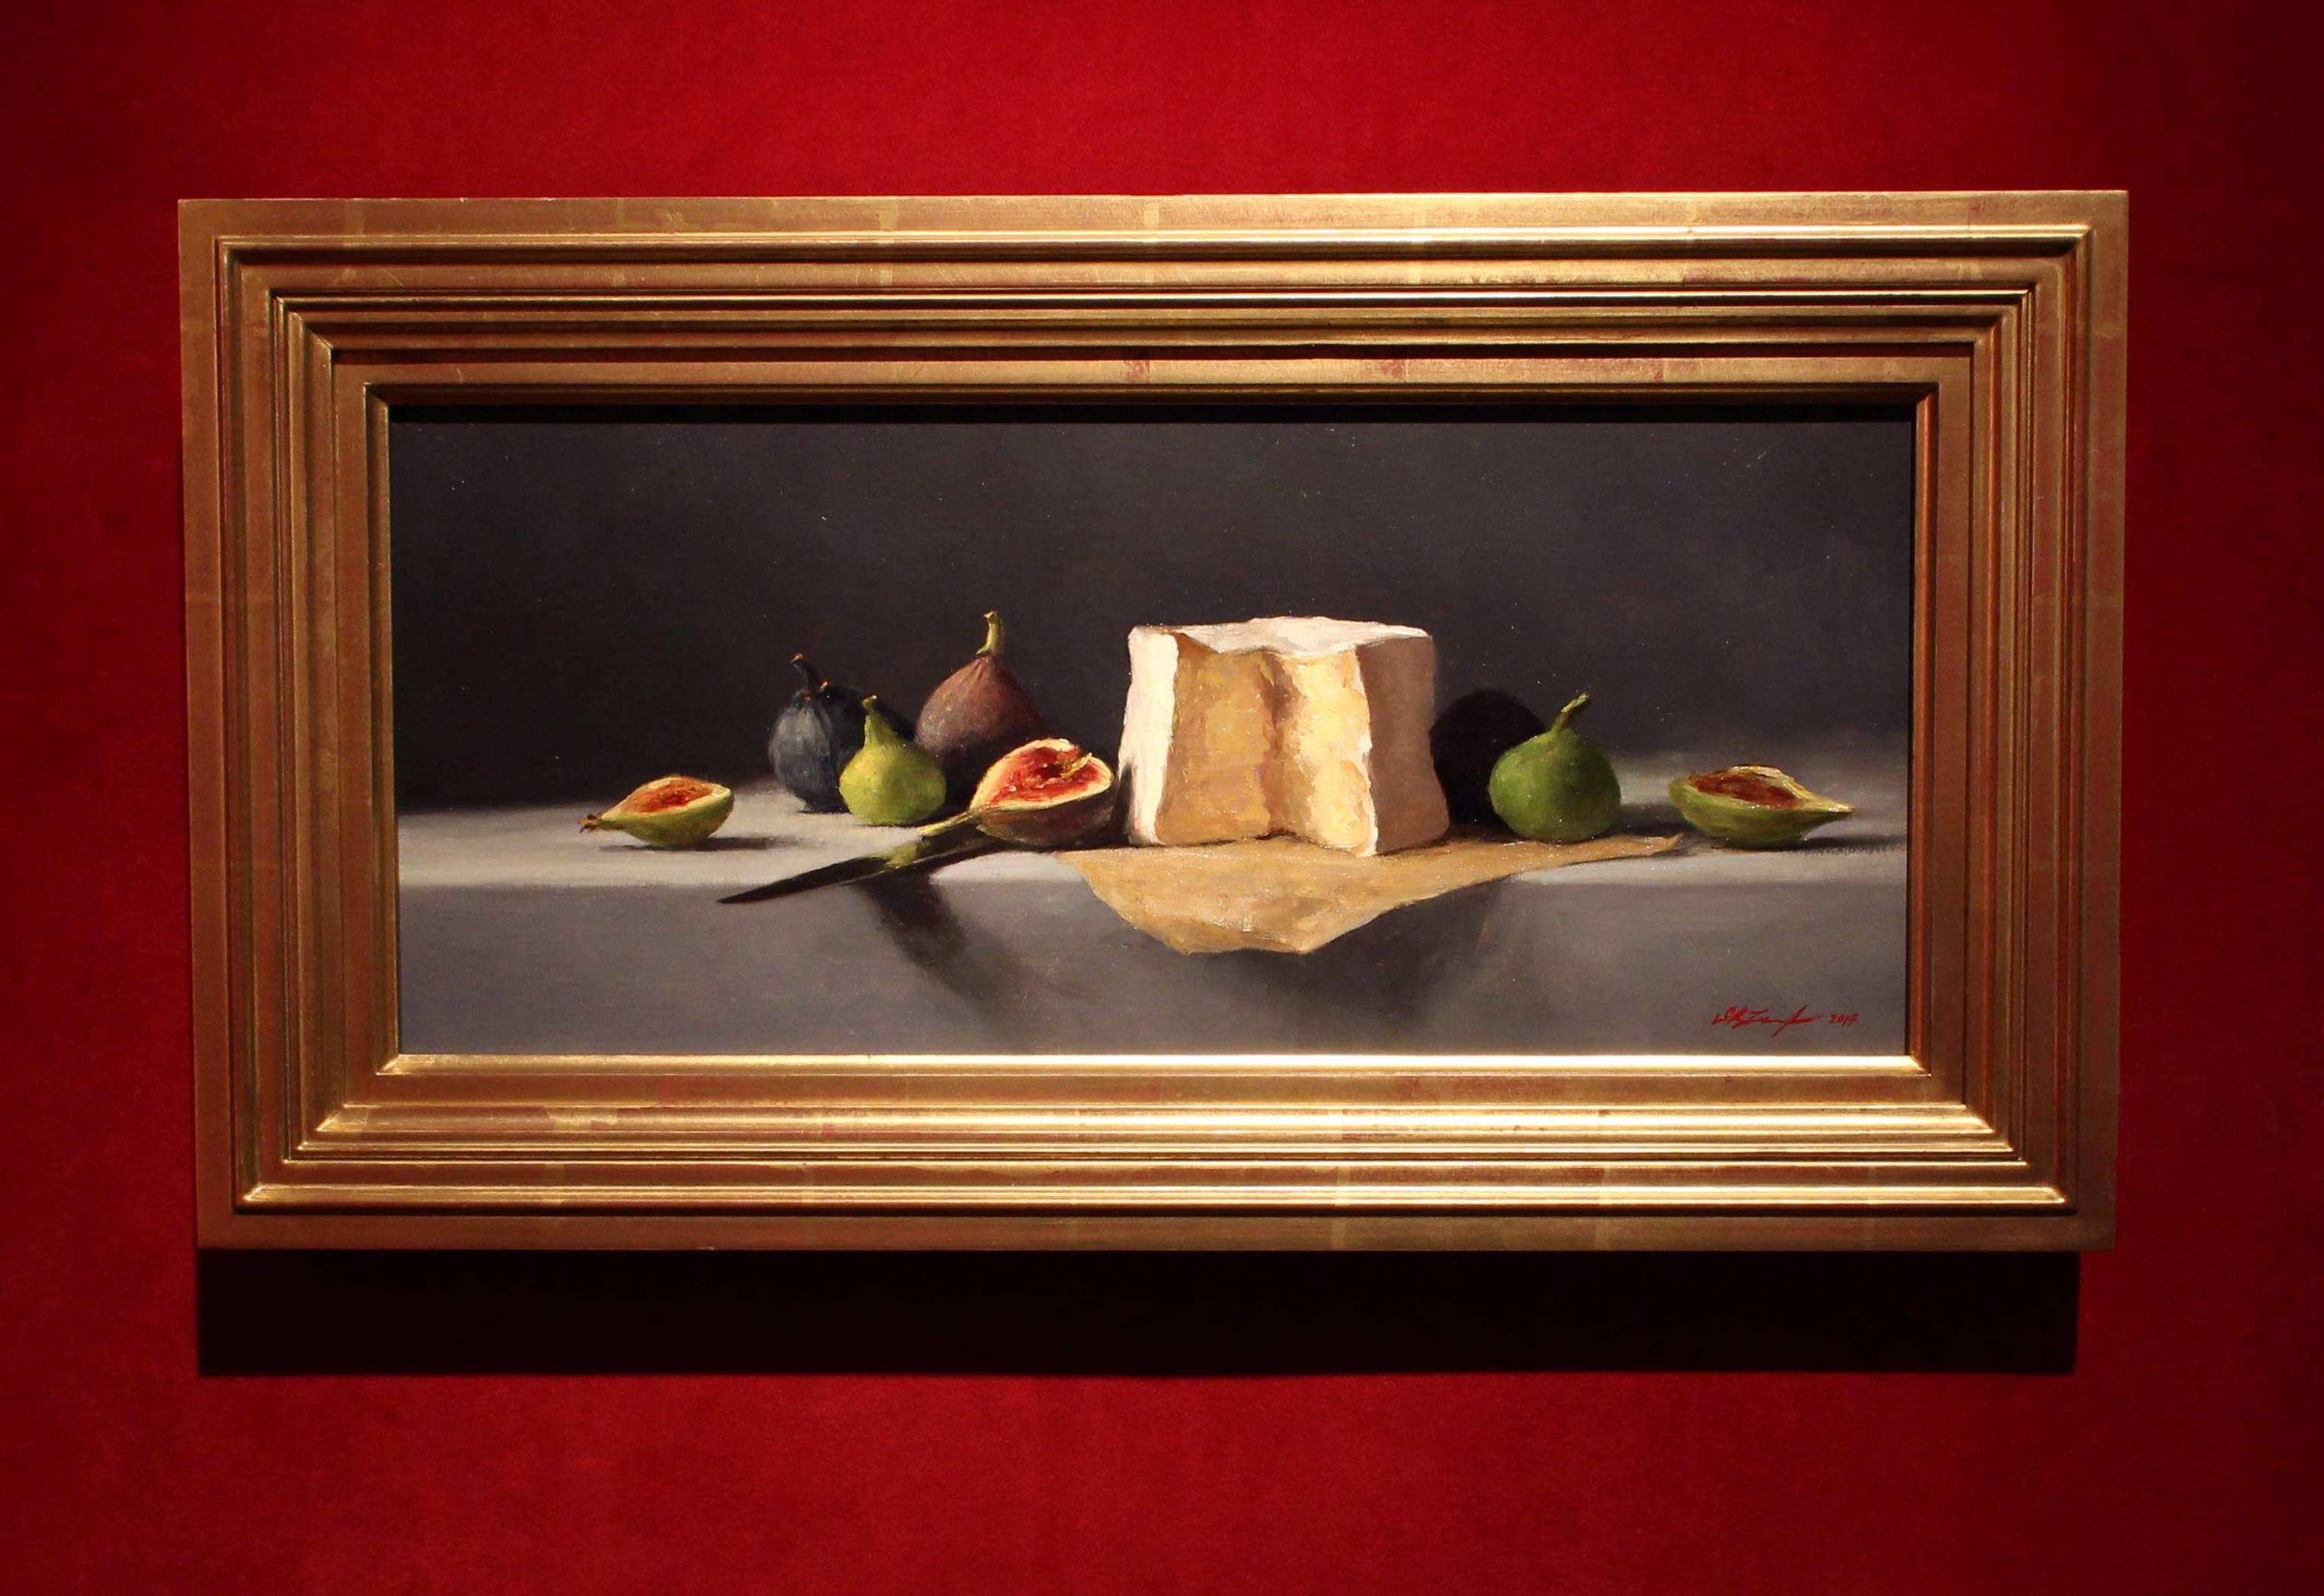 "L’Explorateur and Figs" is a sumptuous still life of figs and fromage featuring rich hues of blue gray, violet, navy, red & vibrant green. 

Sarah Lamb is a talented and dynamic realist painter. With classical skill—and through